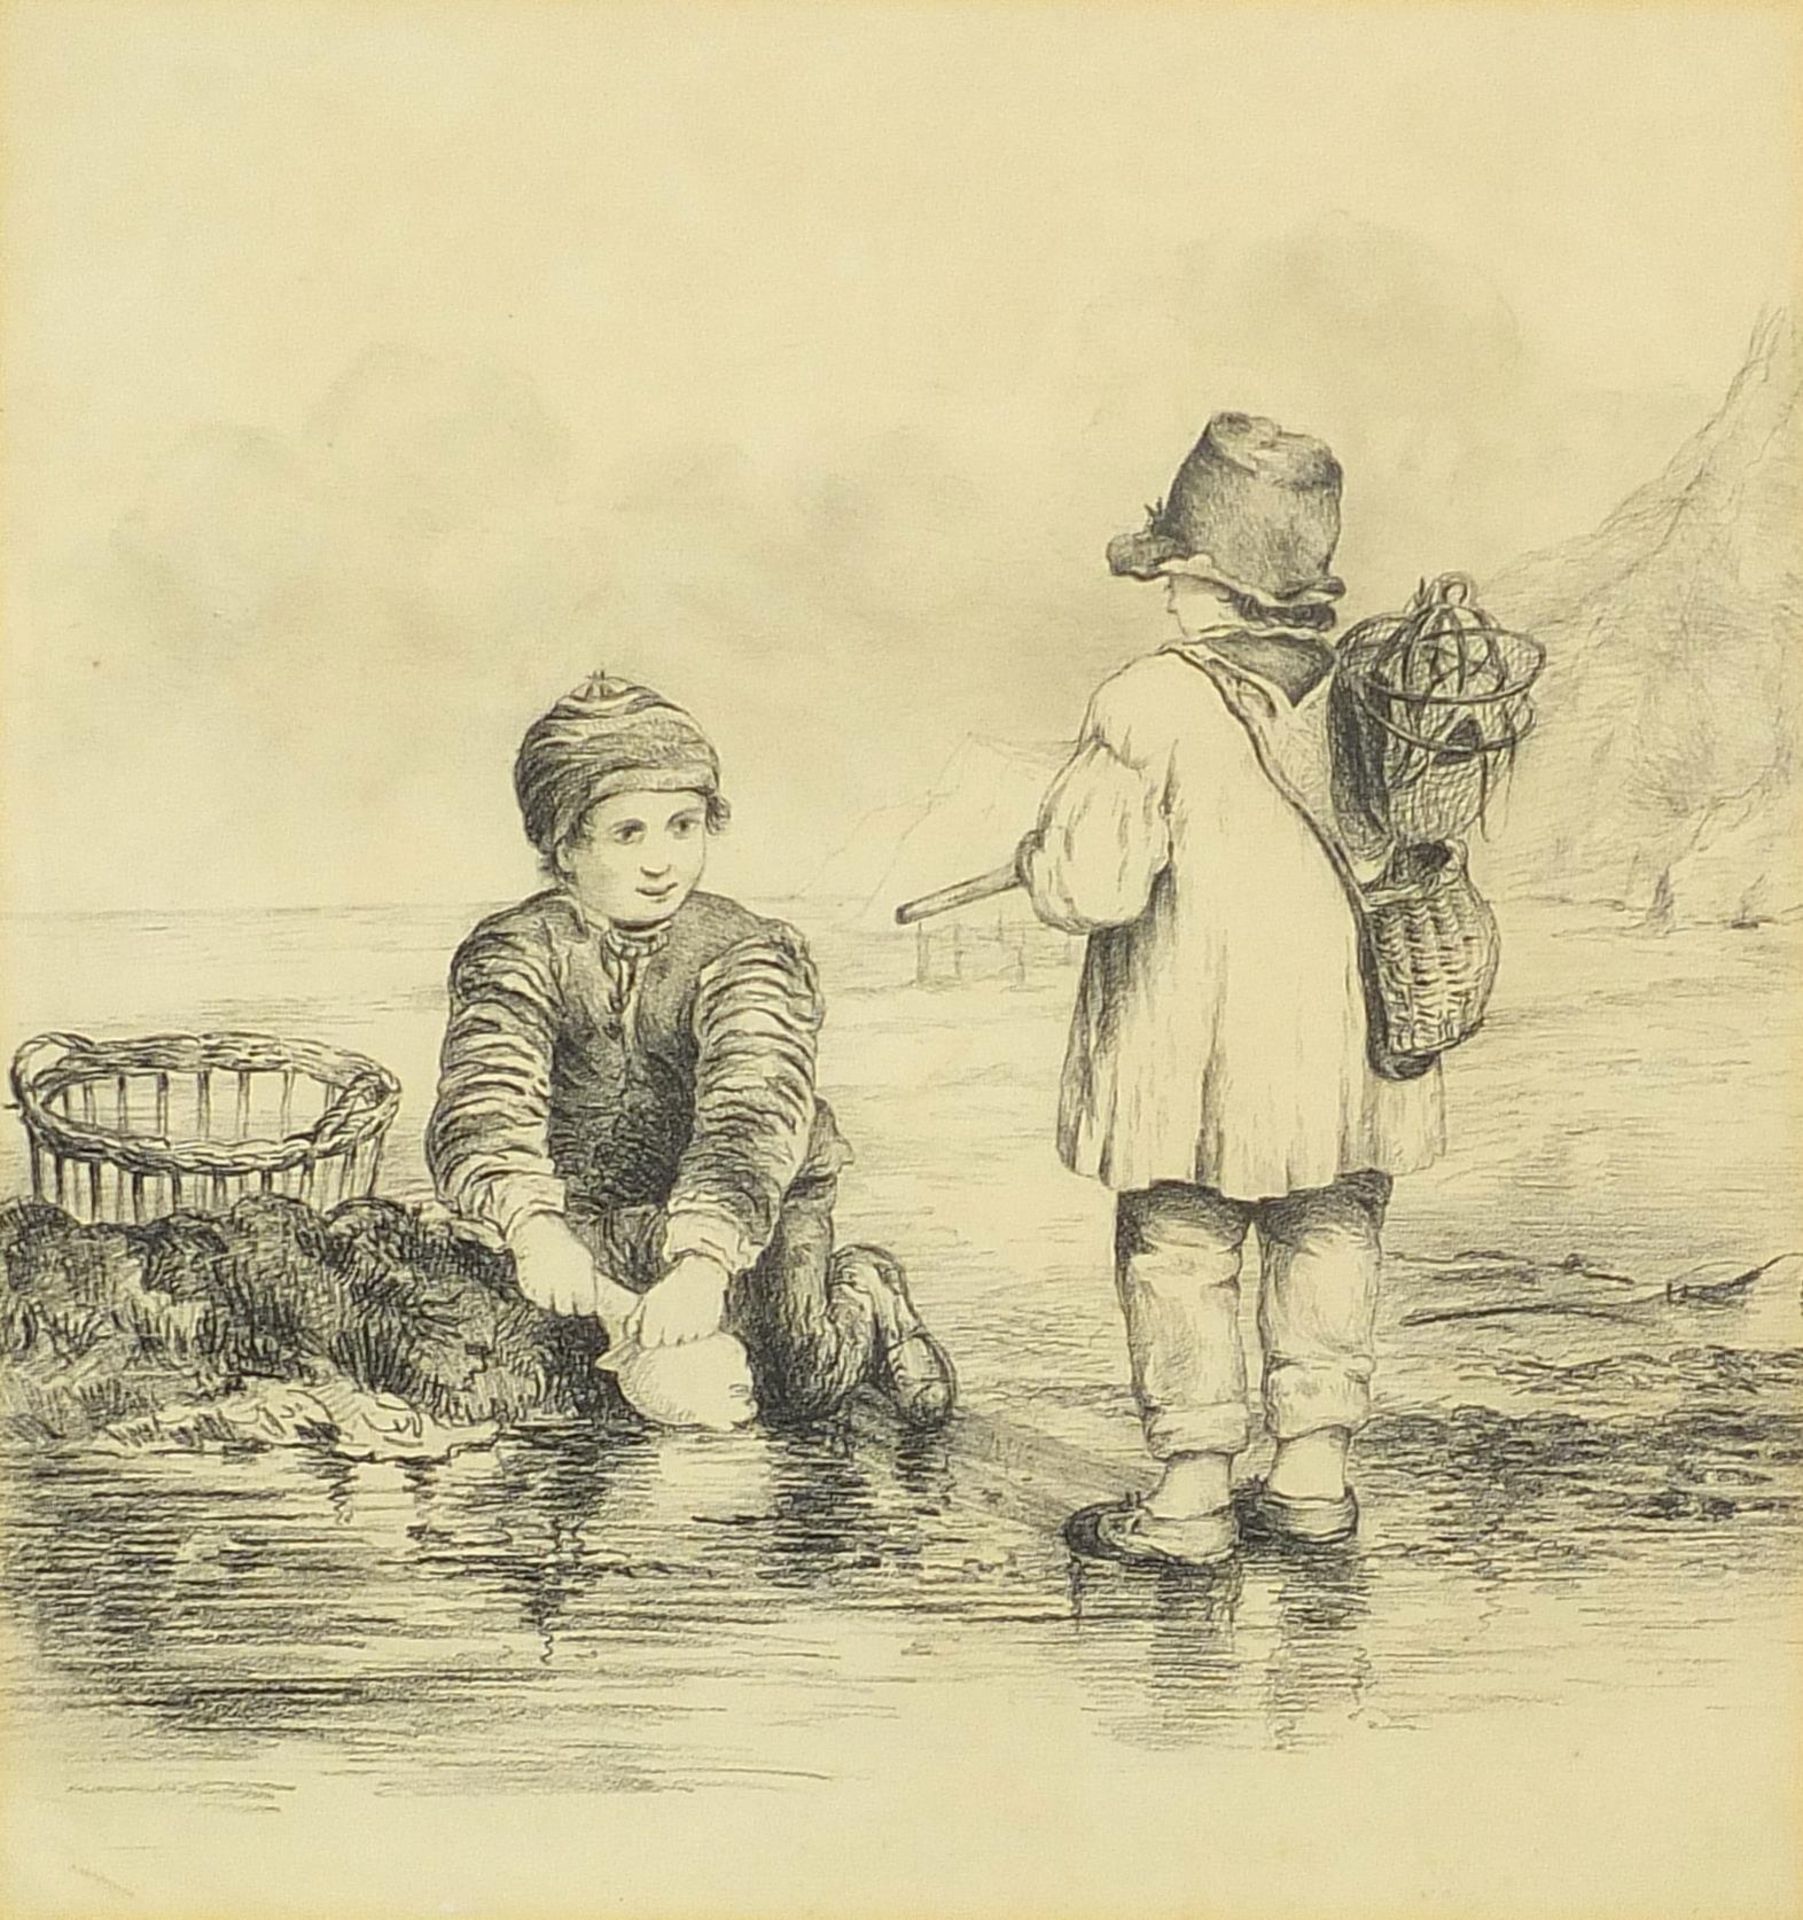 Two children crabbing on a beach, charcoal, mounted, framed and glazed, 31cm x 28.5cm excluding